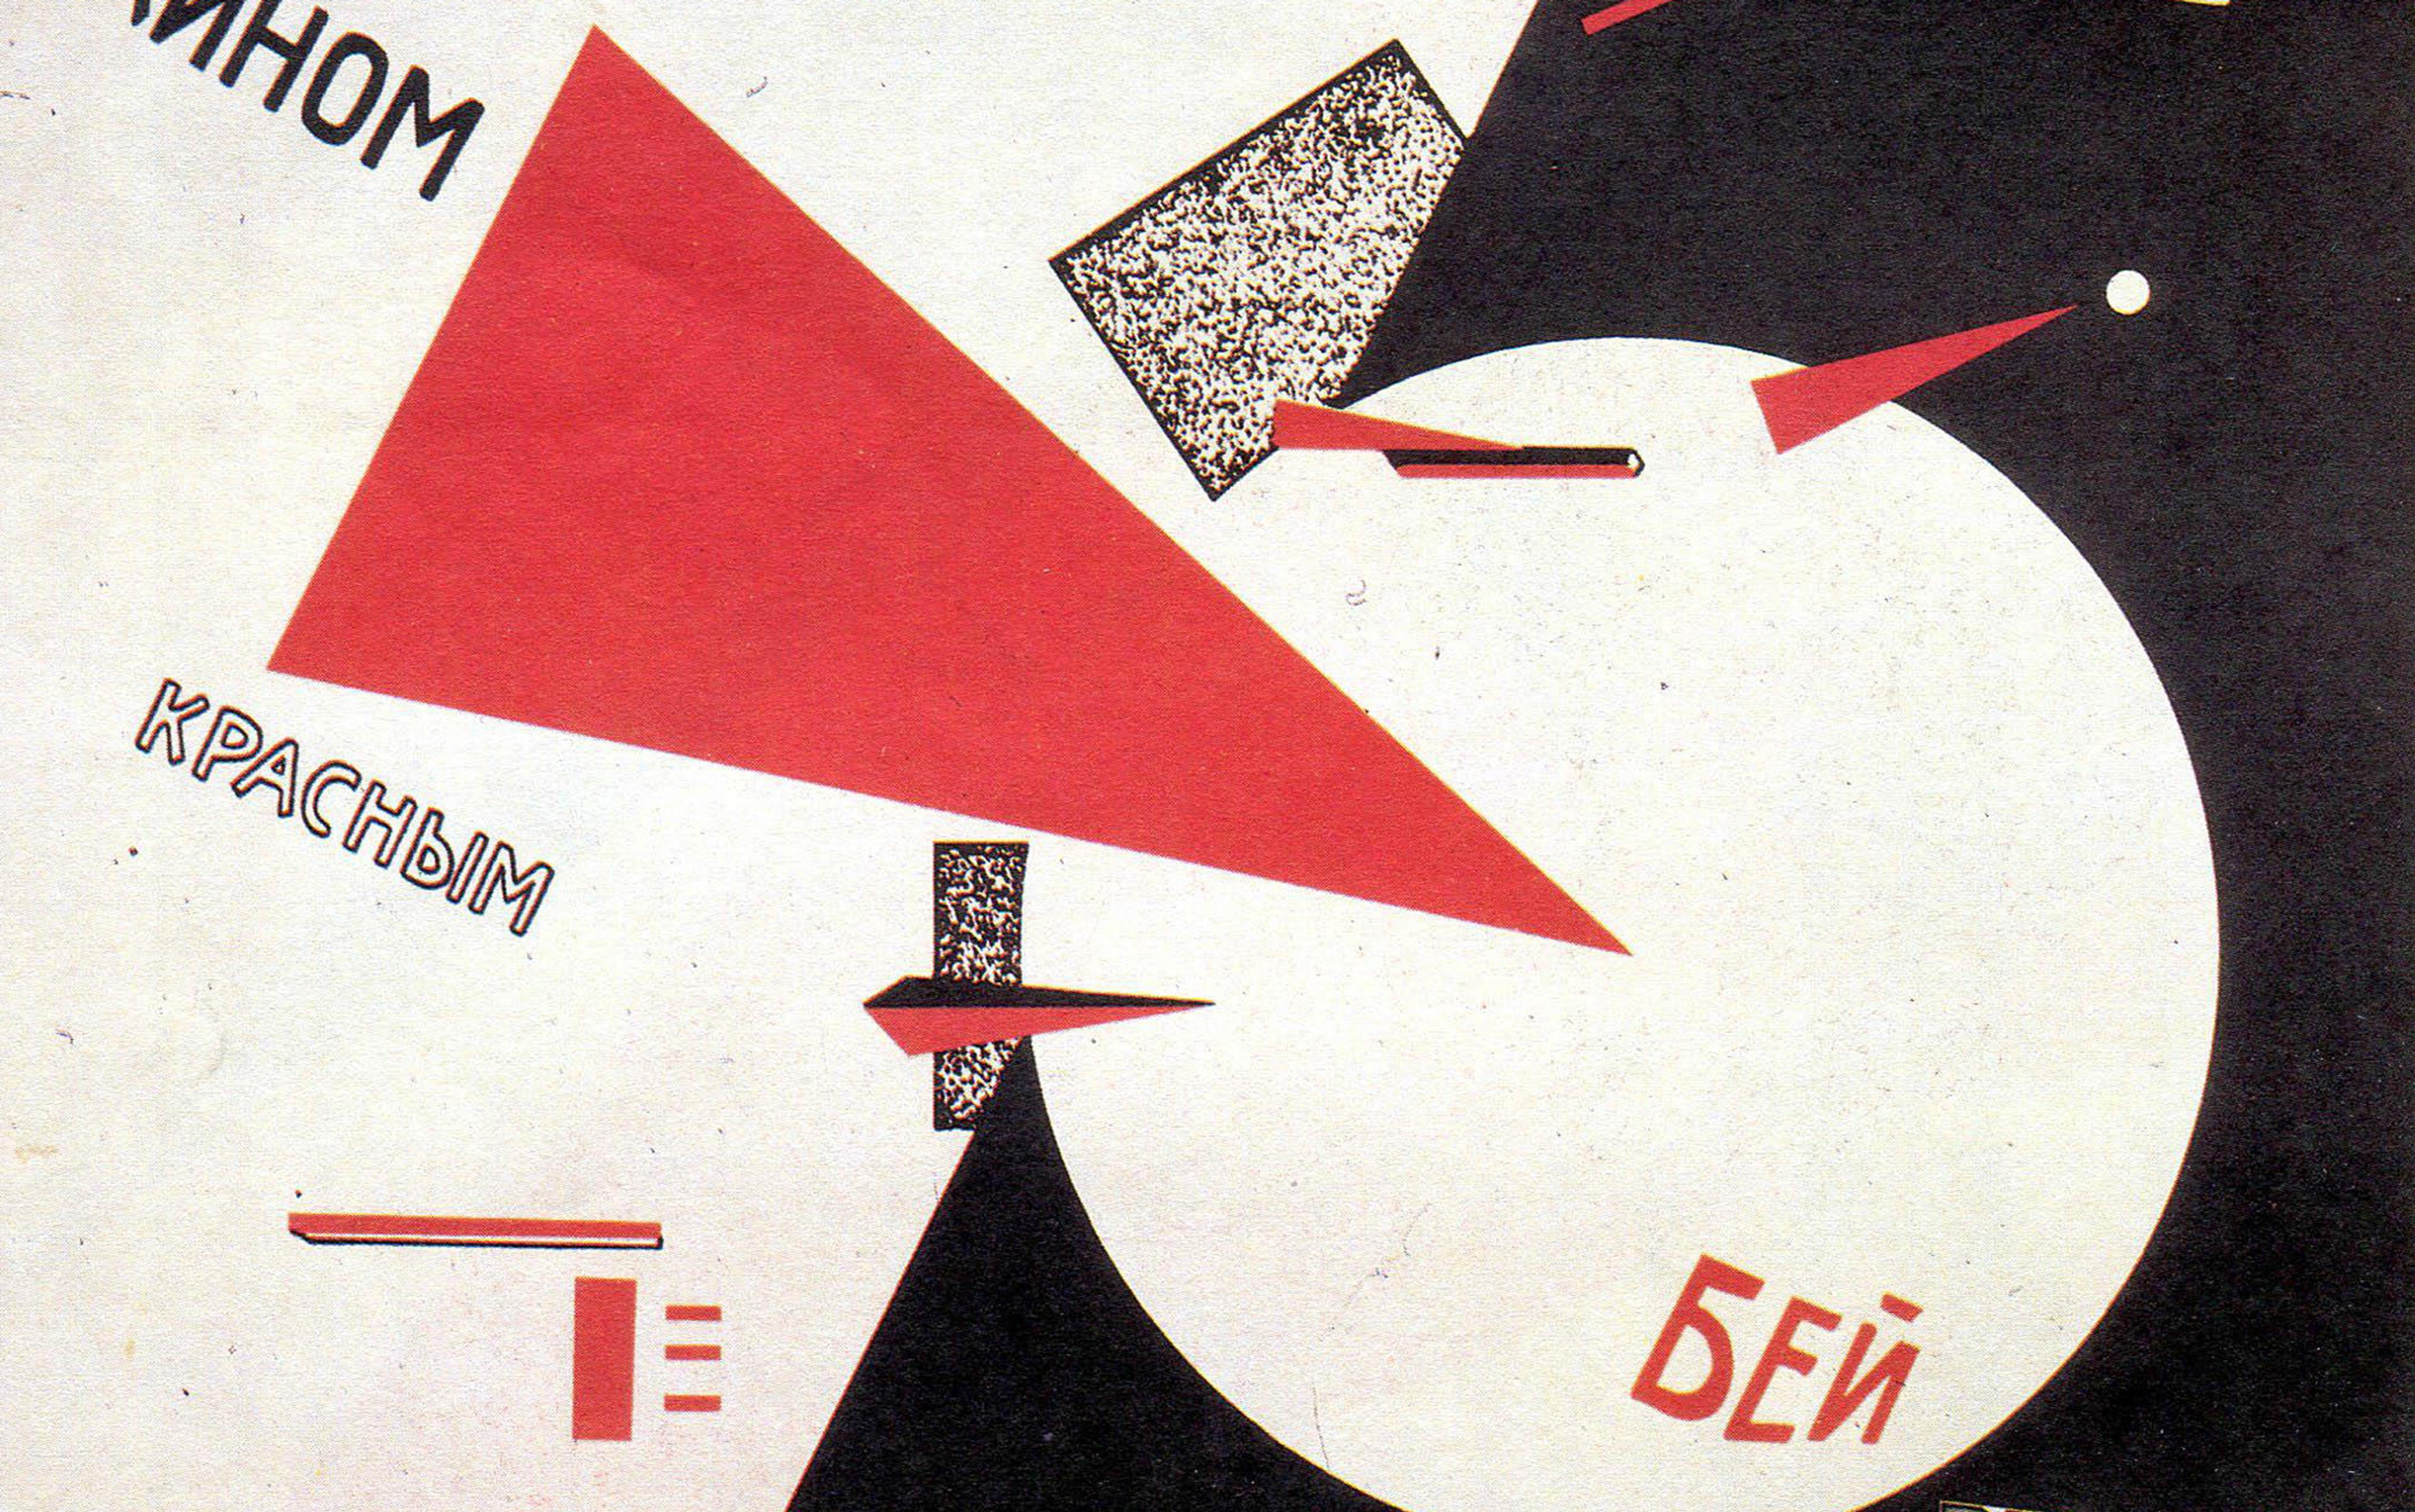 Abstract artwork featuring geometric shapes, primarily red and black triangles, against a white background. Russian text is interspersed, with a red triangle pointing rightward and a large white circle on the right. Various smaller shapes and text elements are scattered around.